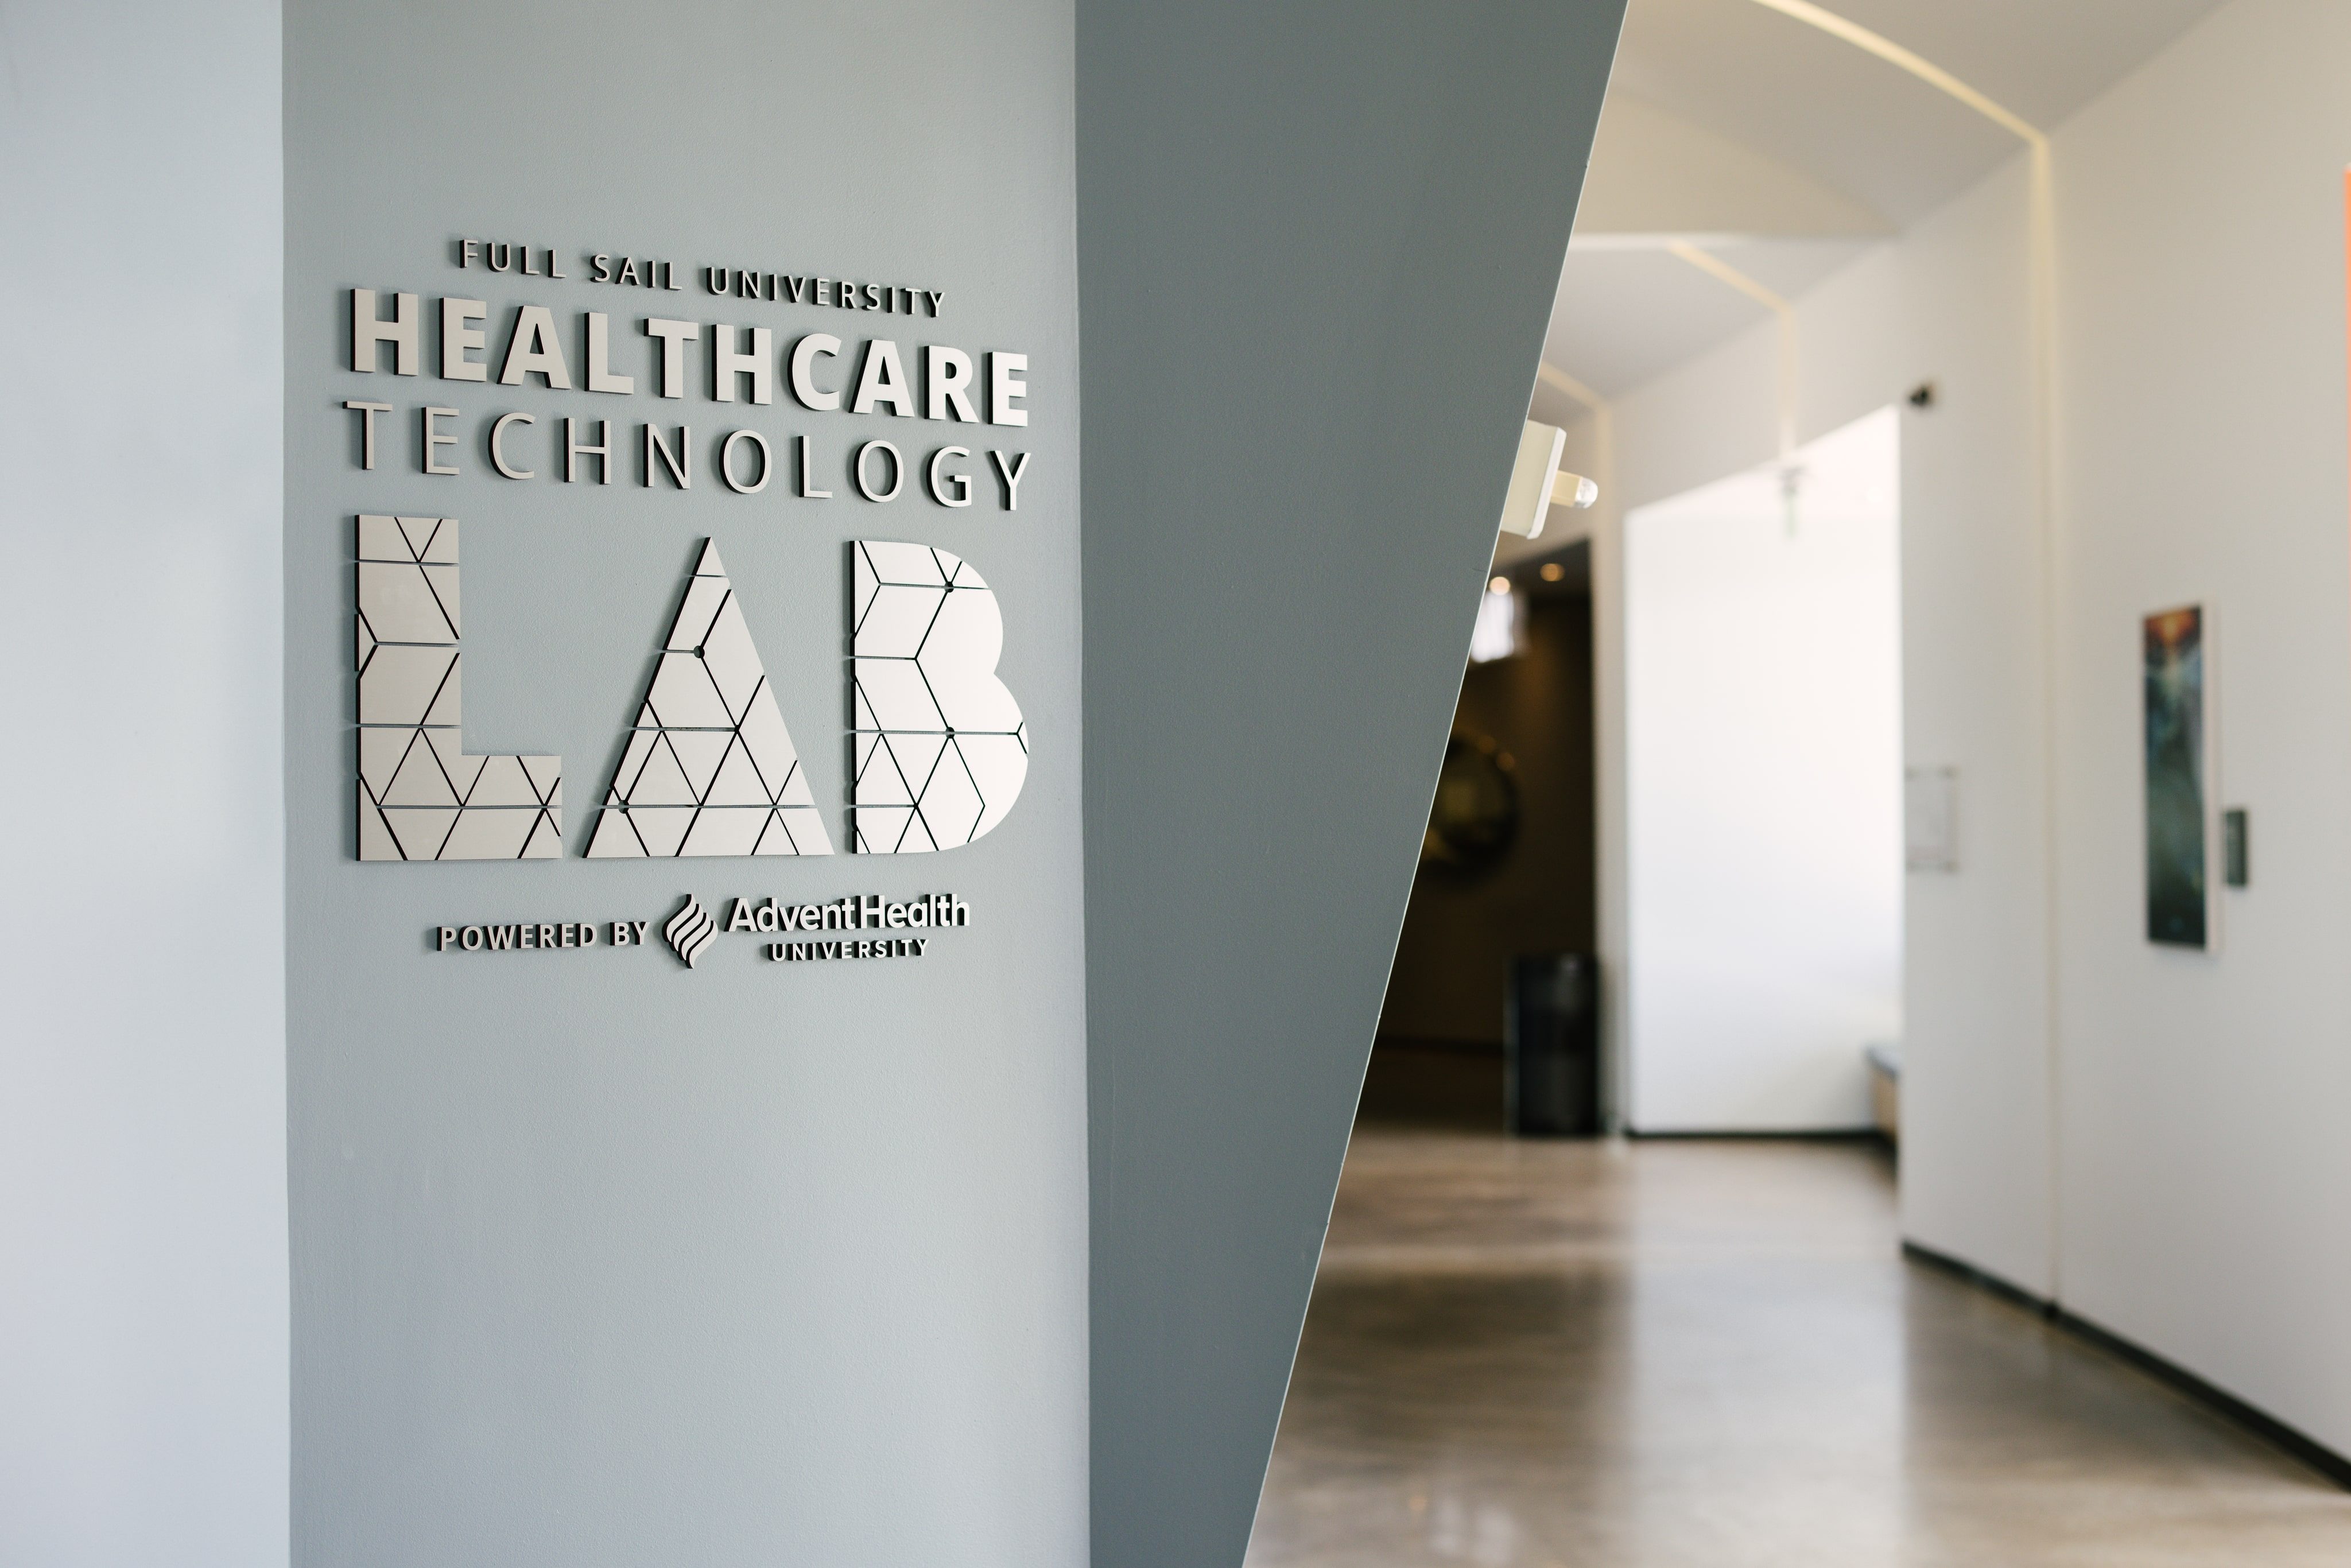 New Health Care Technology Lab to Advance Healthcare Through Virtual Reality Research and Creation